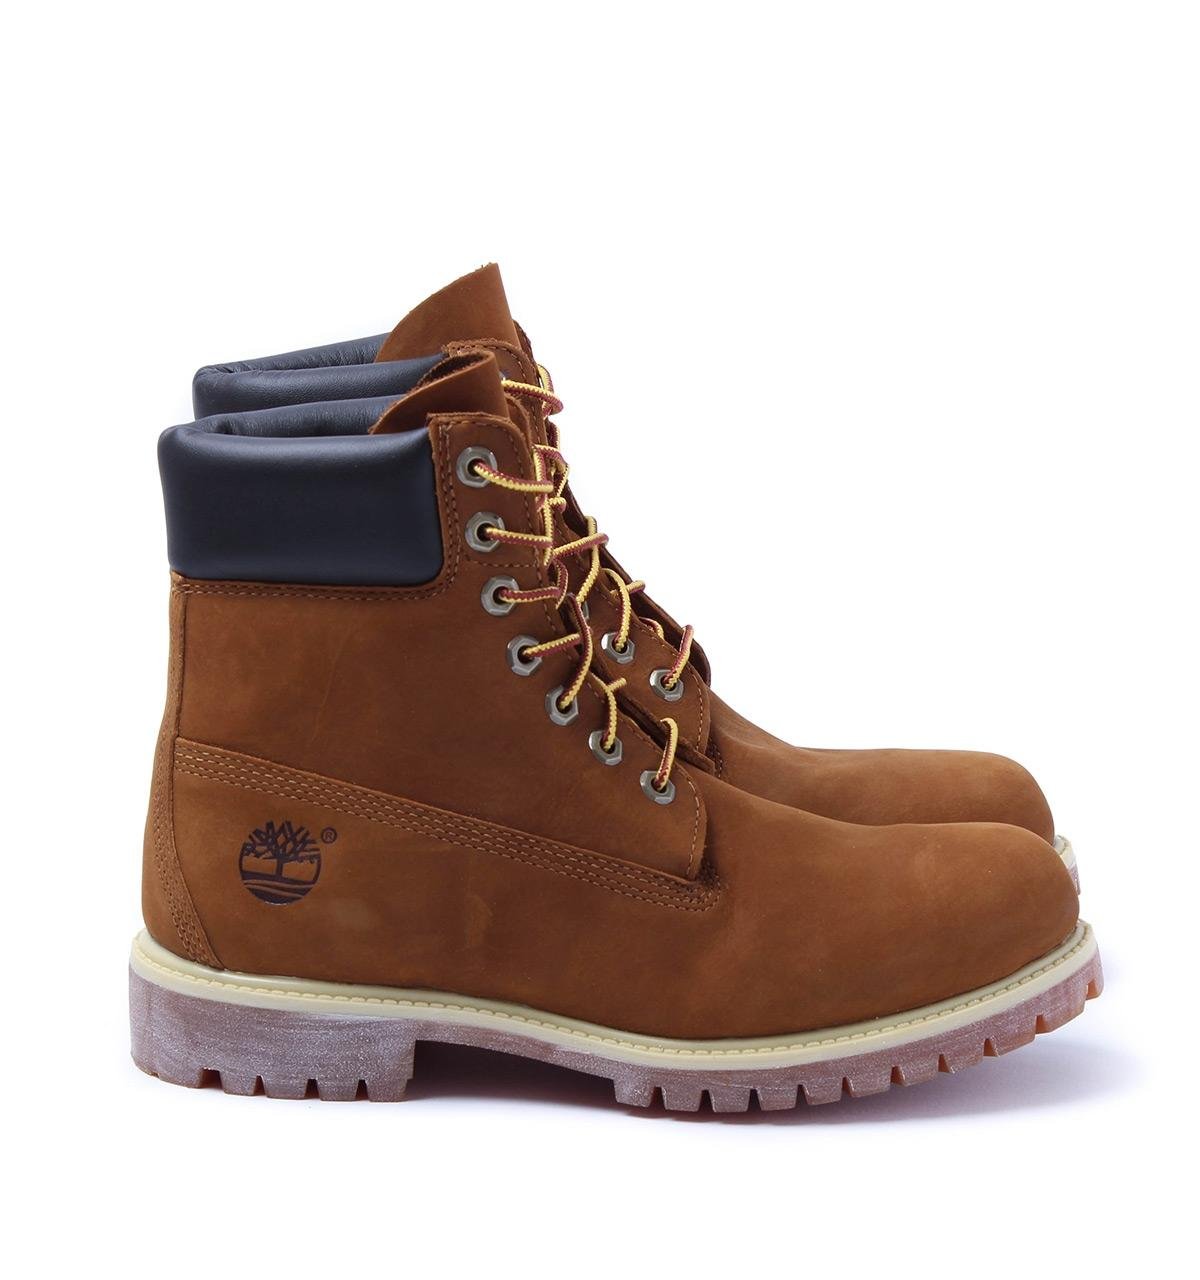 timberland boots rust